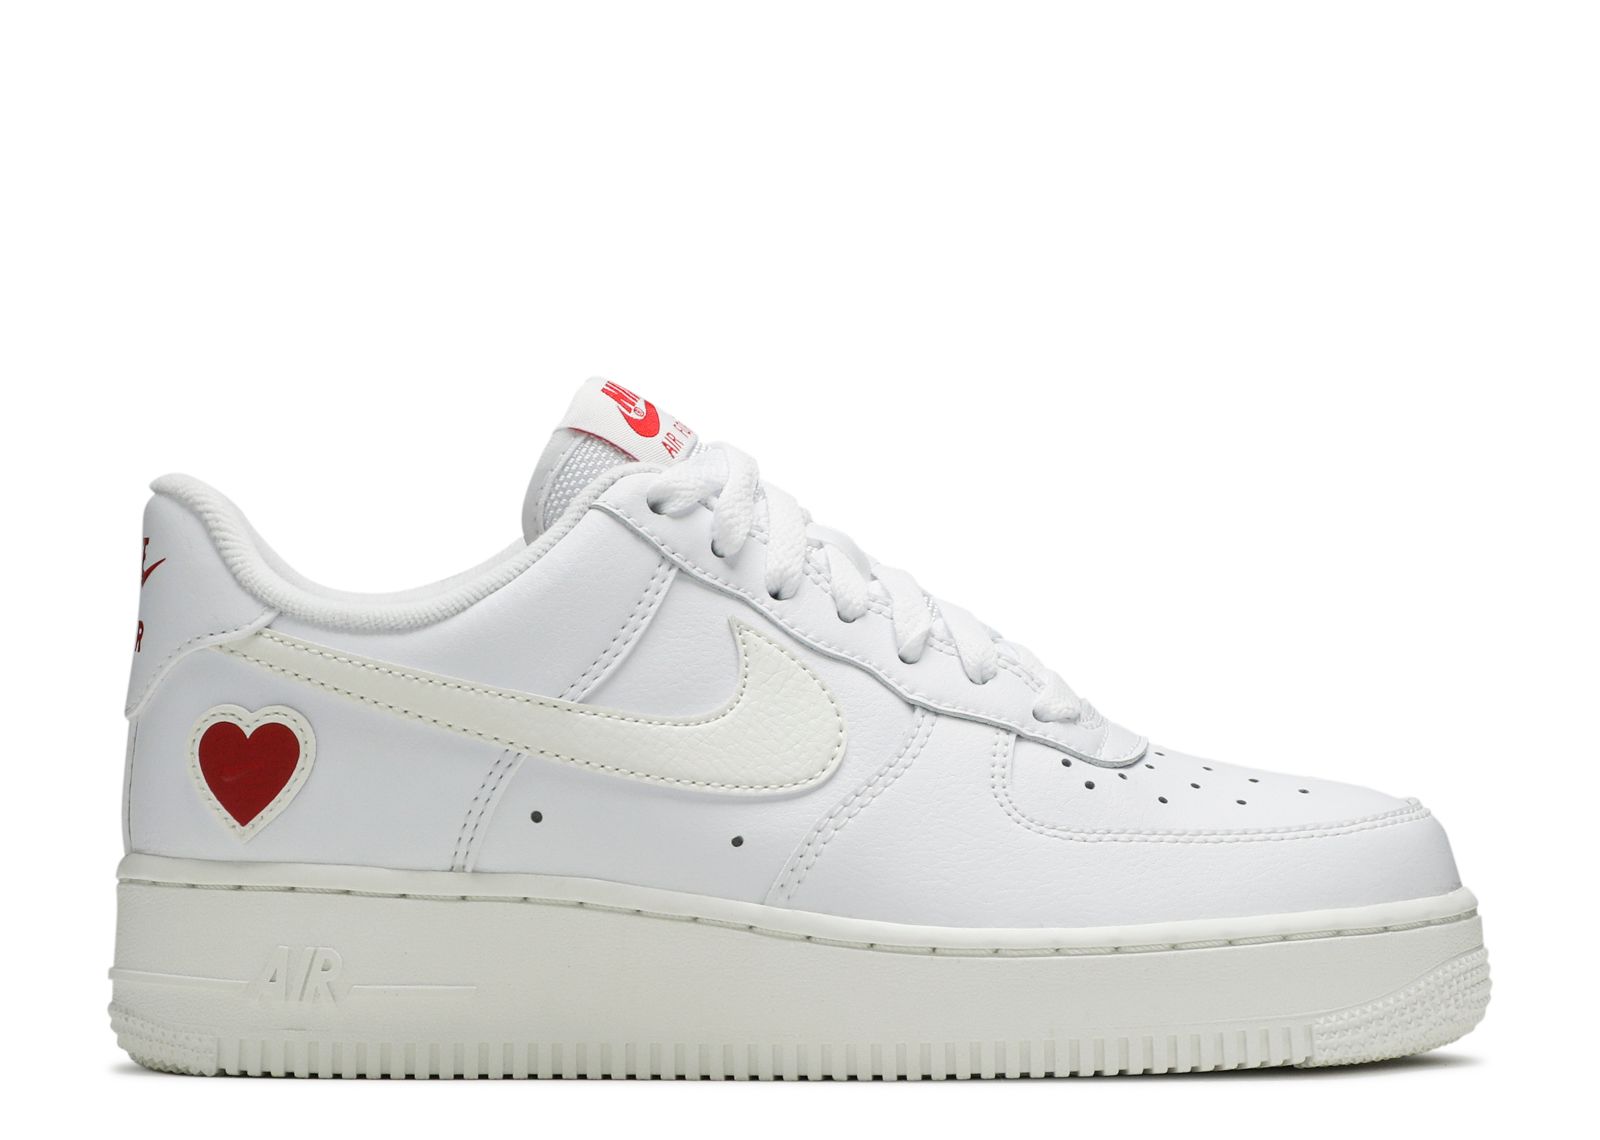 Air force valentines day. Nike Air Force Valentines Day 2021. Nike Air Force 1 Valentine's. Кроссовки Nike Air Force 1 Low Valentine's Day. Nike Air Force 1 Valentines Day.